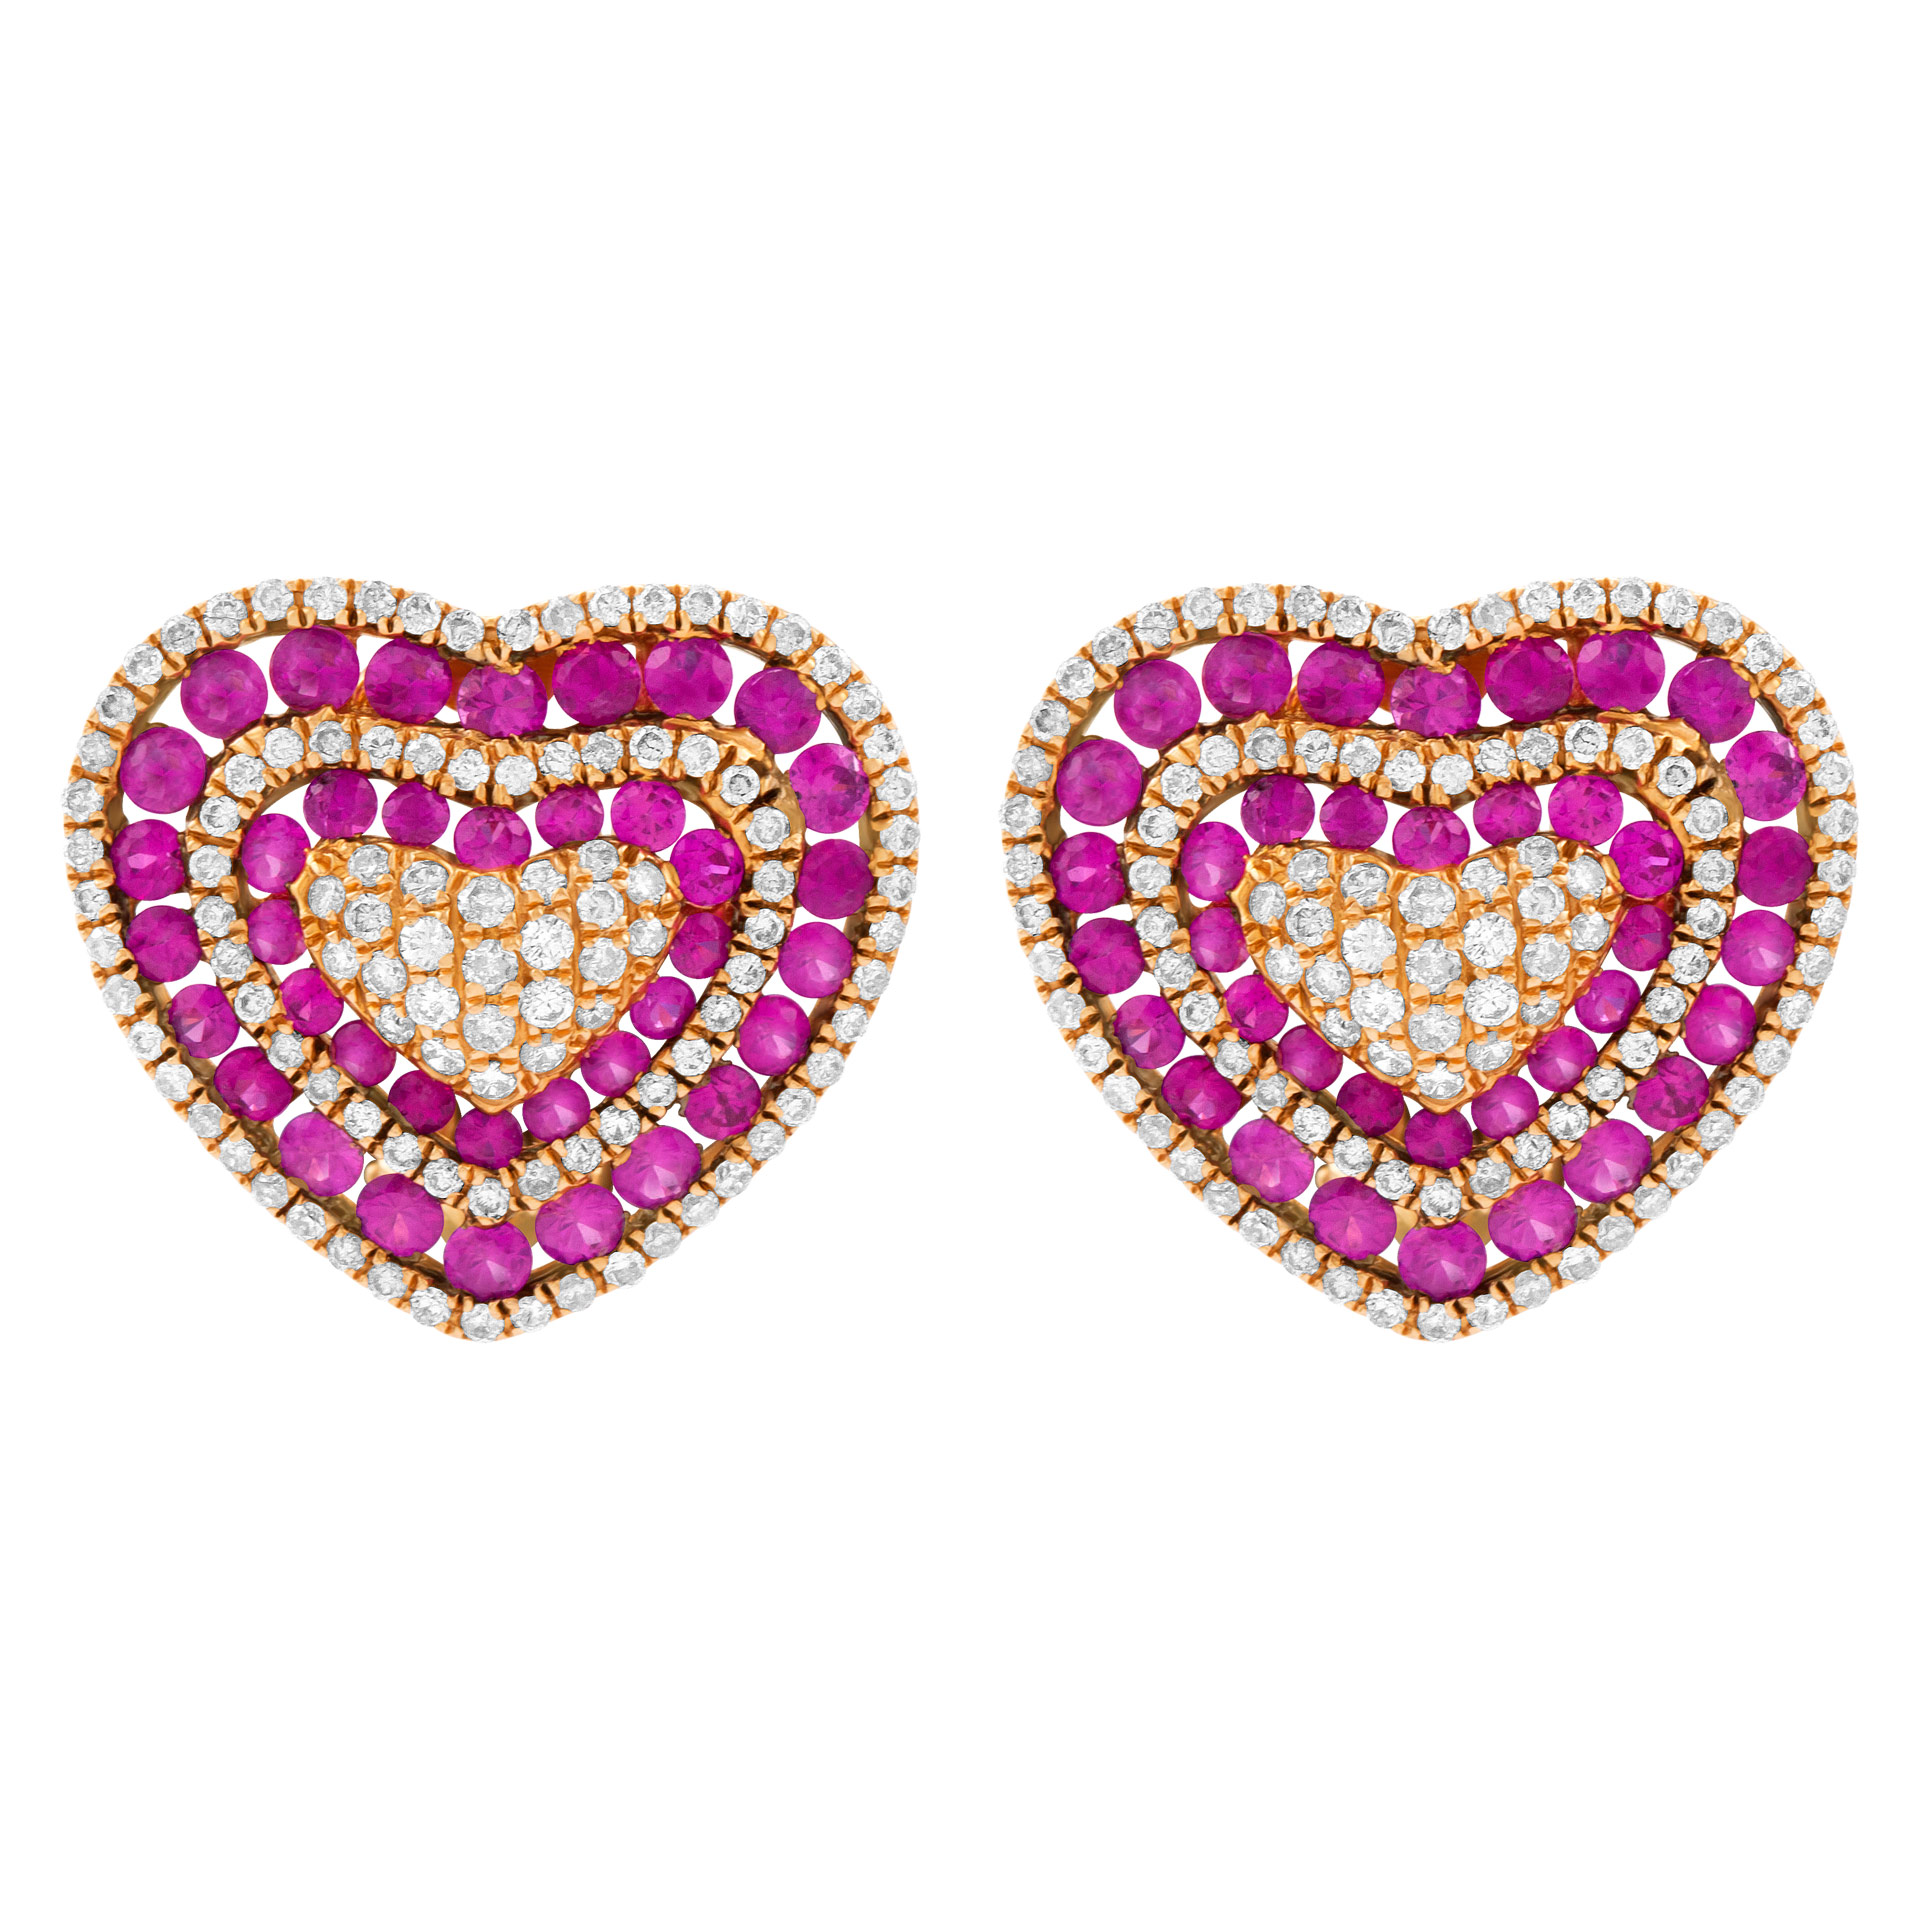 Diamond & ruby heart earrings in 18K pink gold. 2.94 cts in dias. 1.34 cts in rubies image 1